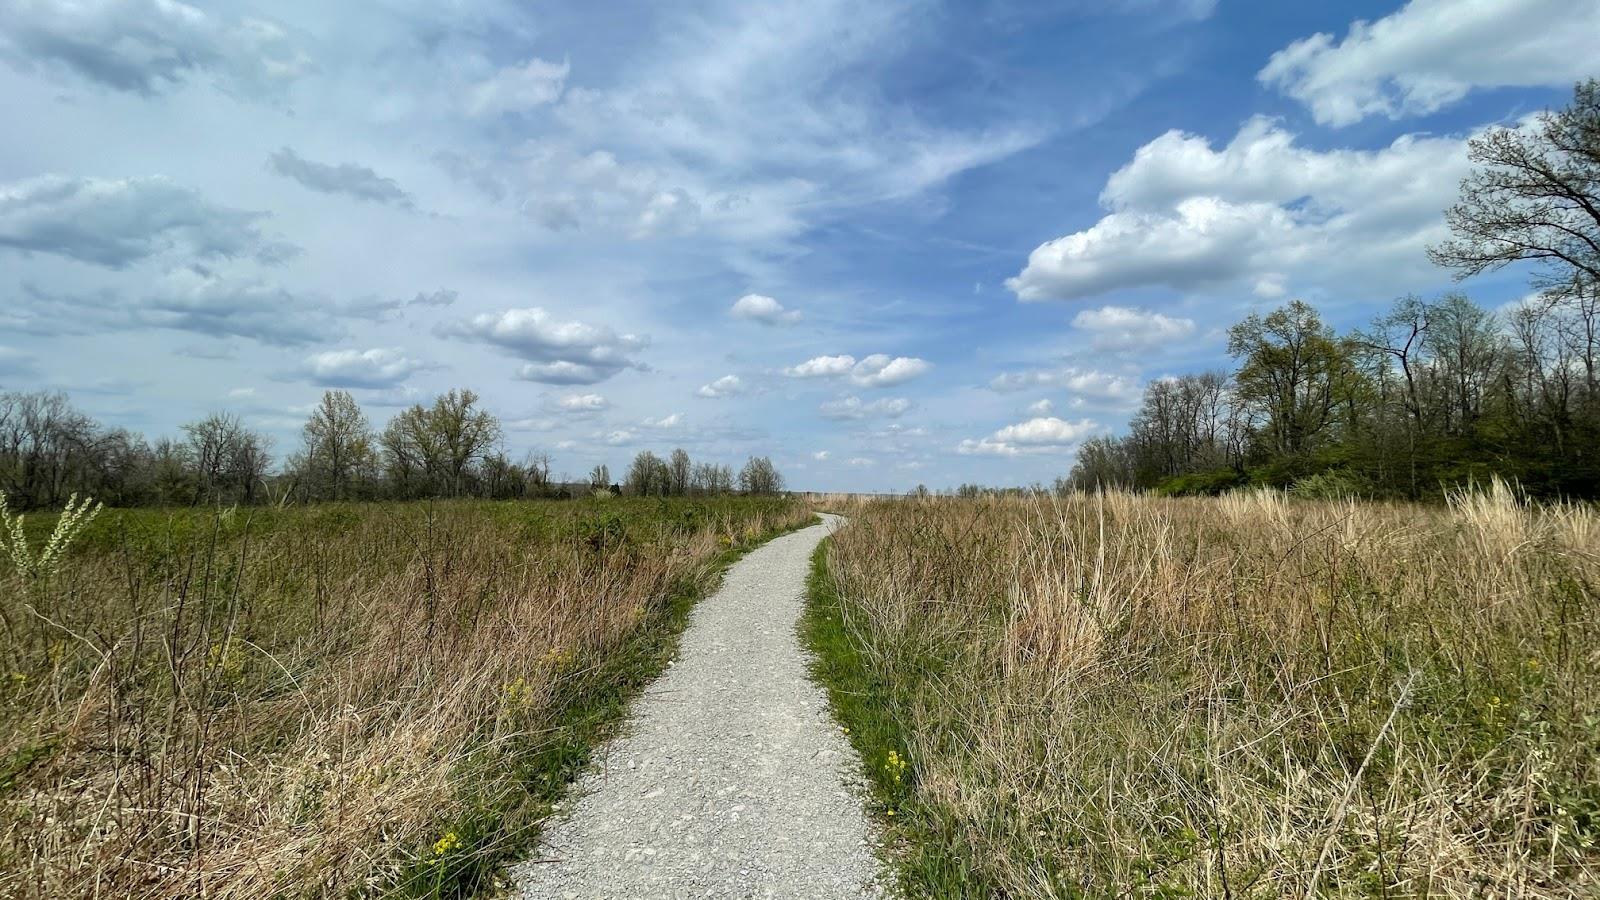 A graveled trail (the Lookout trail) splits a field growing on either side. It leads your eye off to the horizon where there is a tree line stark against a bright blue, slightly clouded sky.